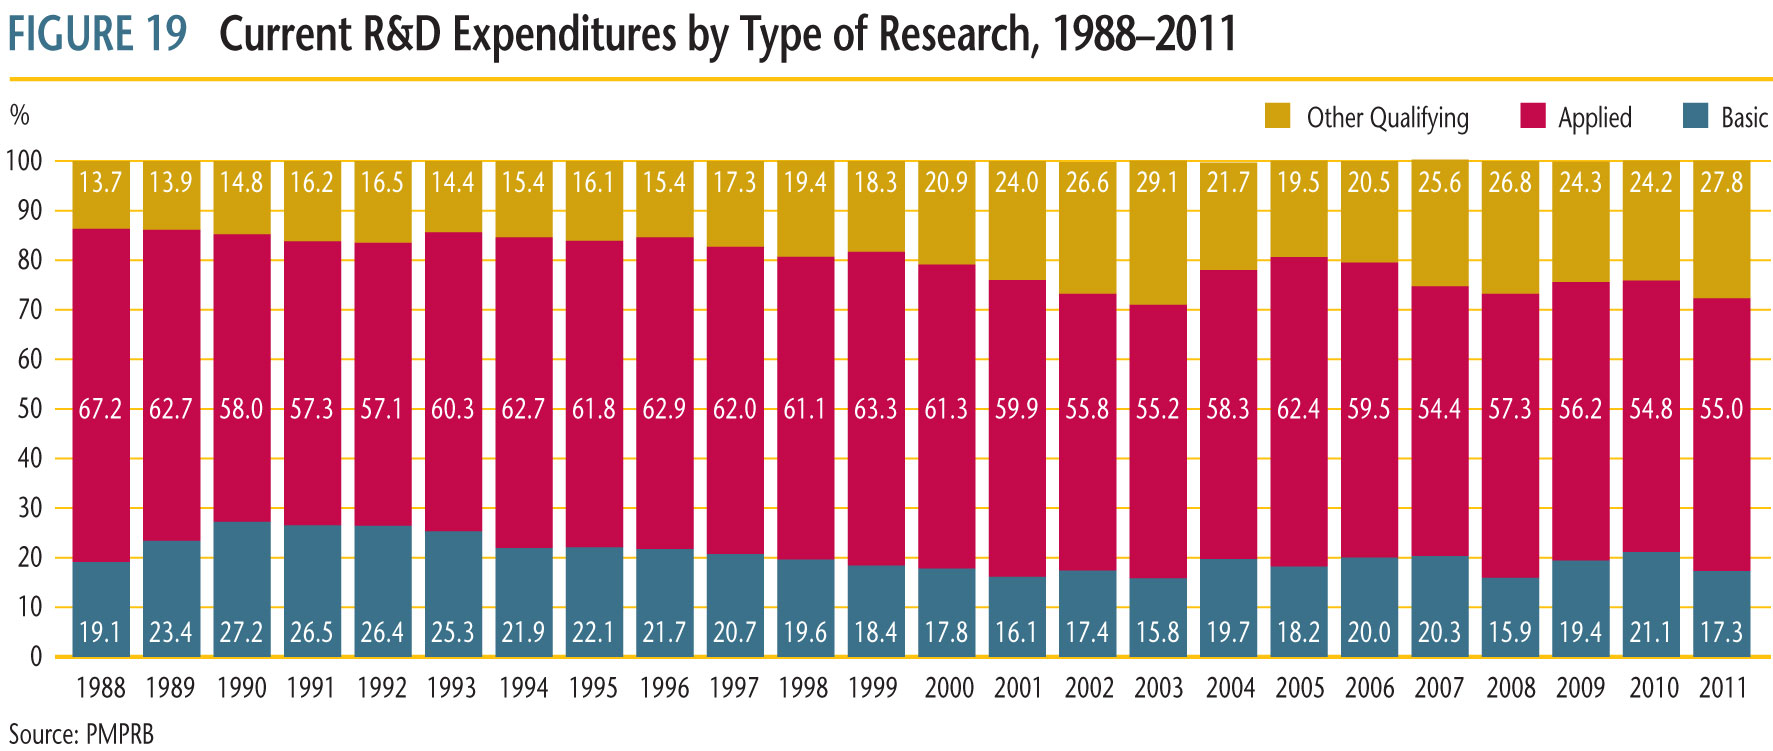 Current R&D Expenditures by type of Research